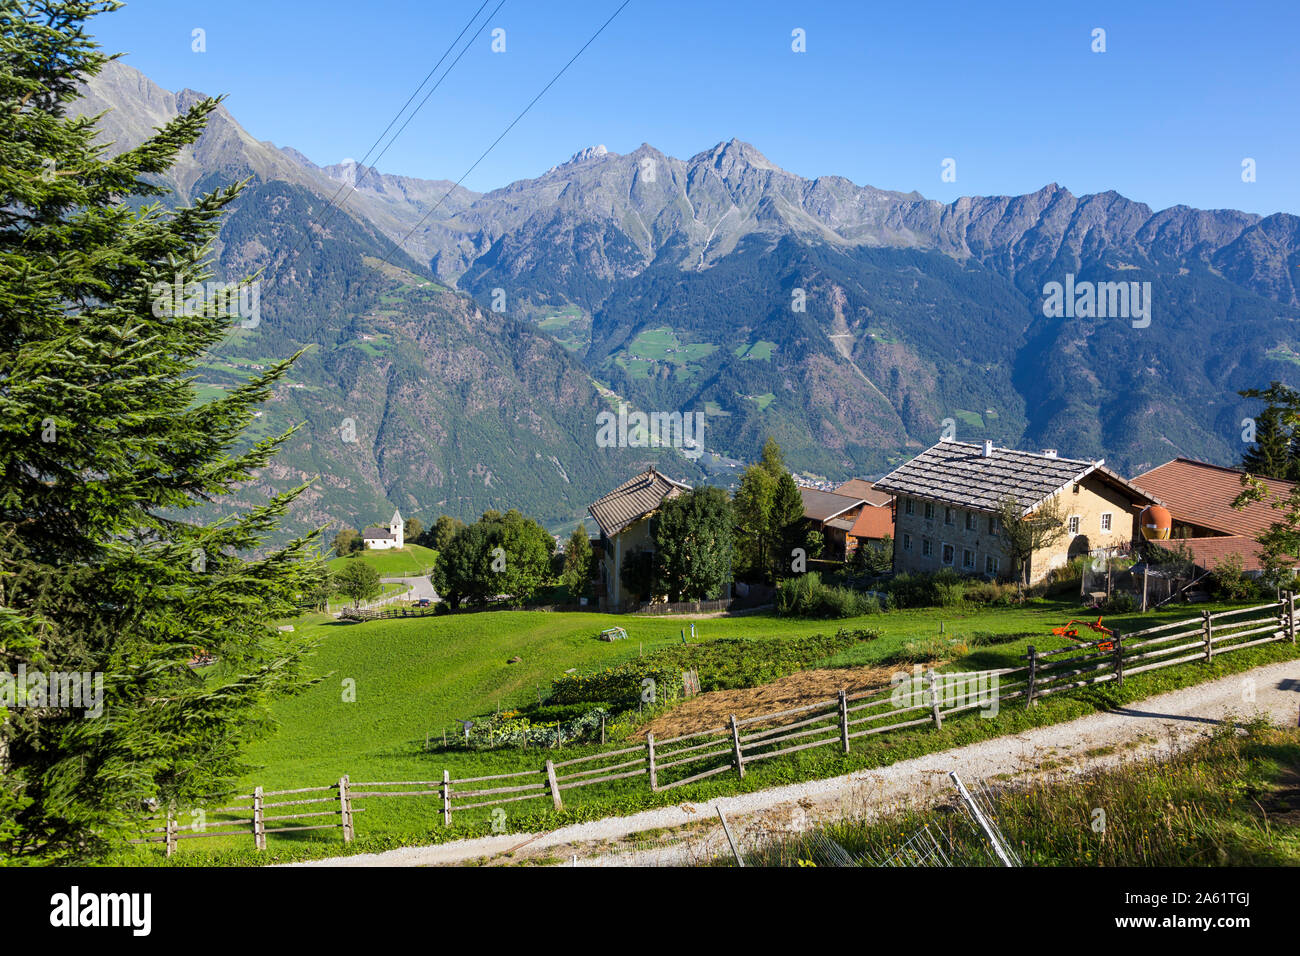 Village of Aschbach in the South Tirol, Italy Stock Photo